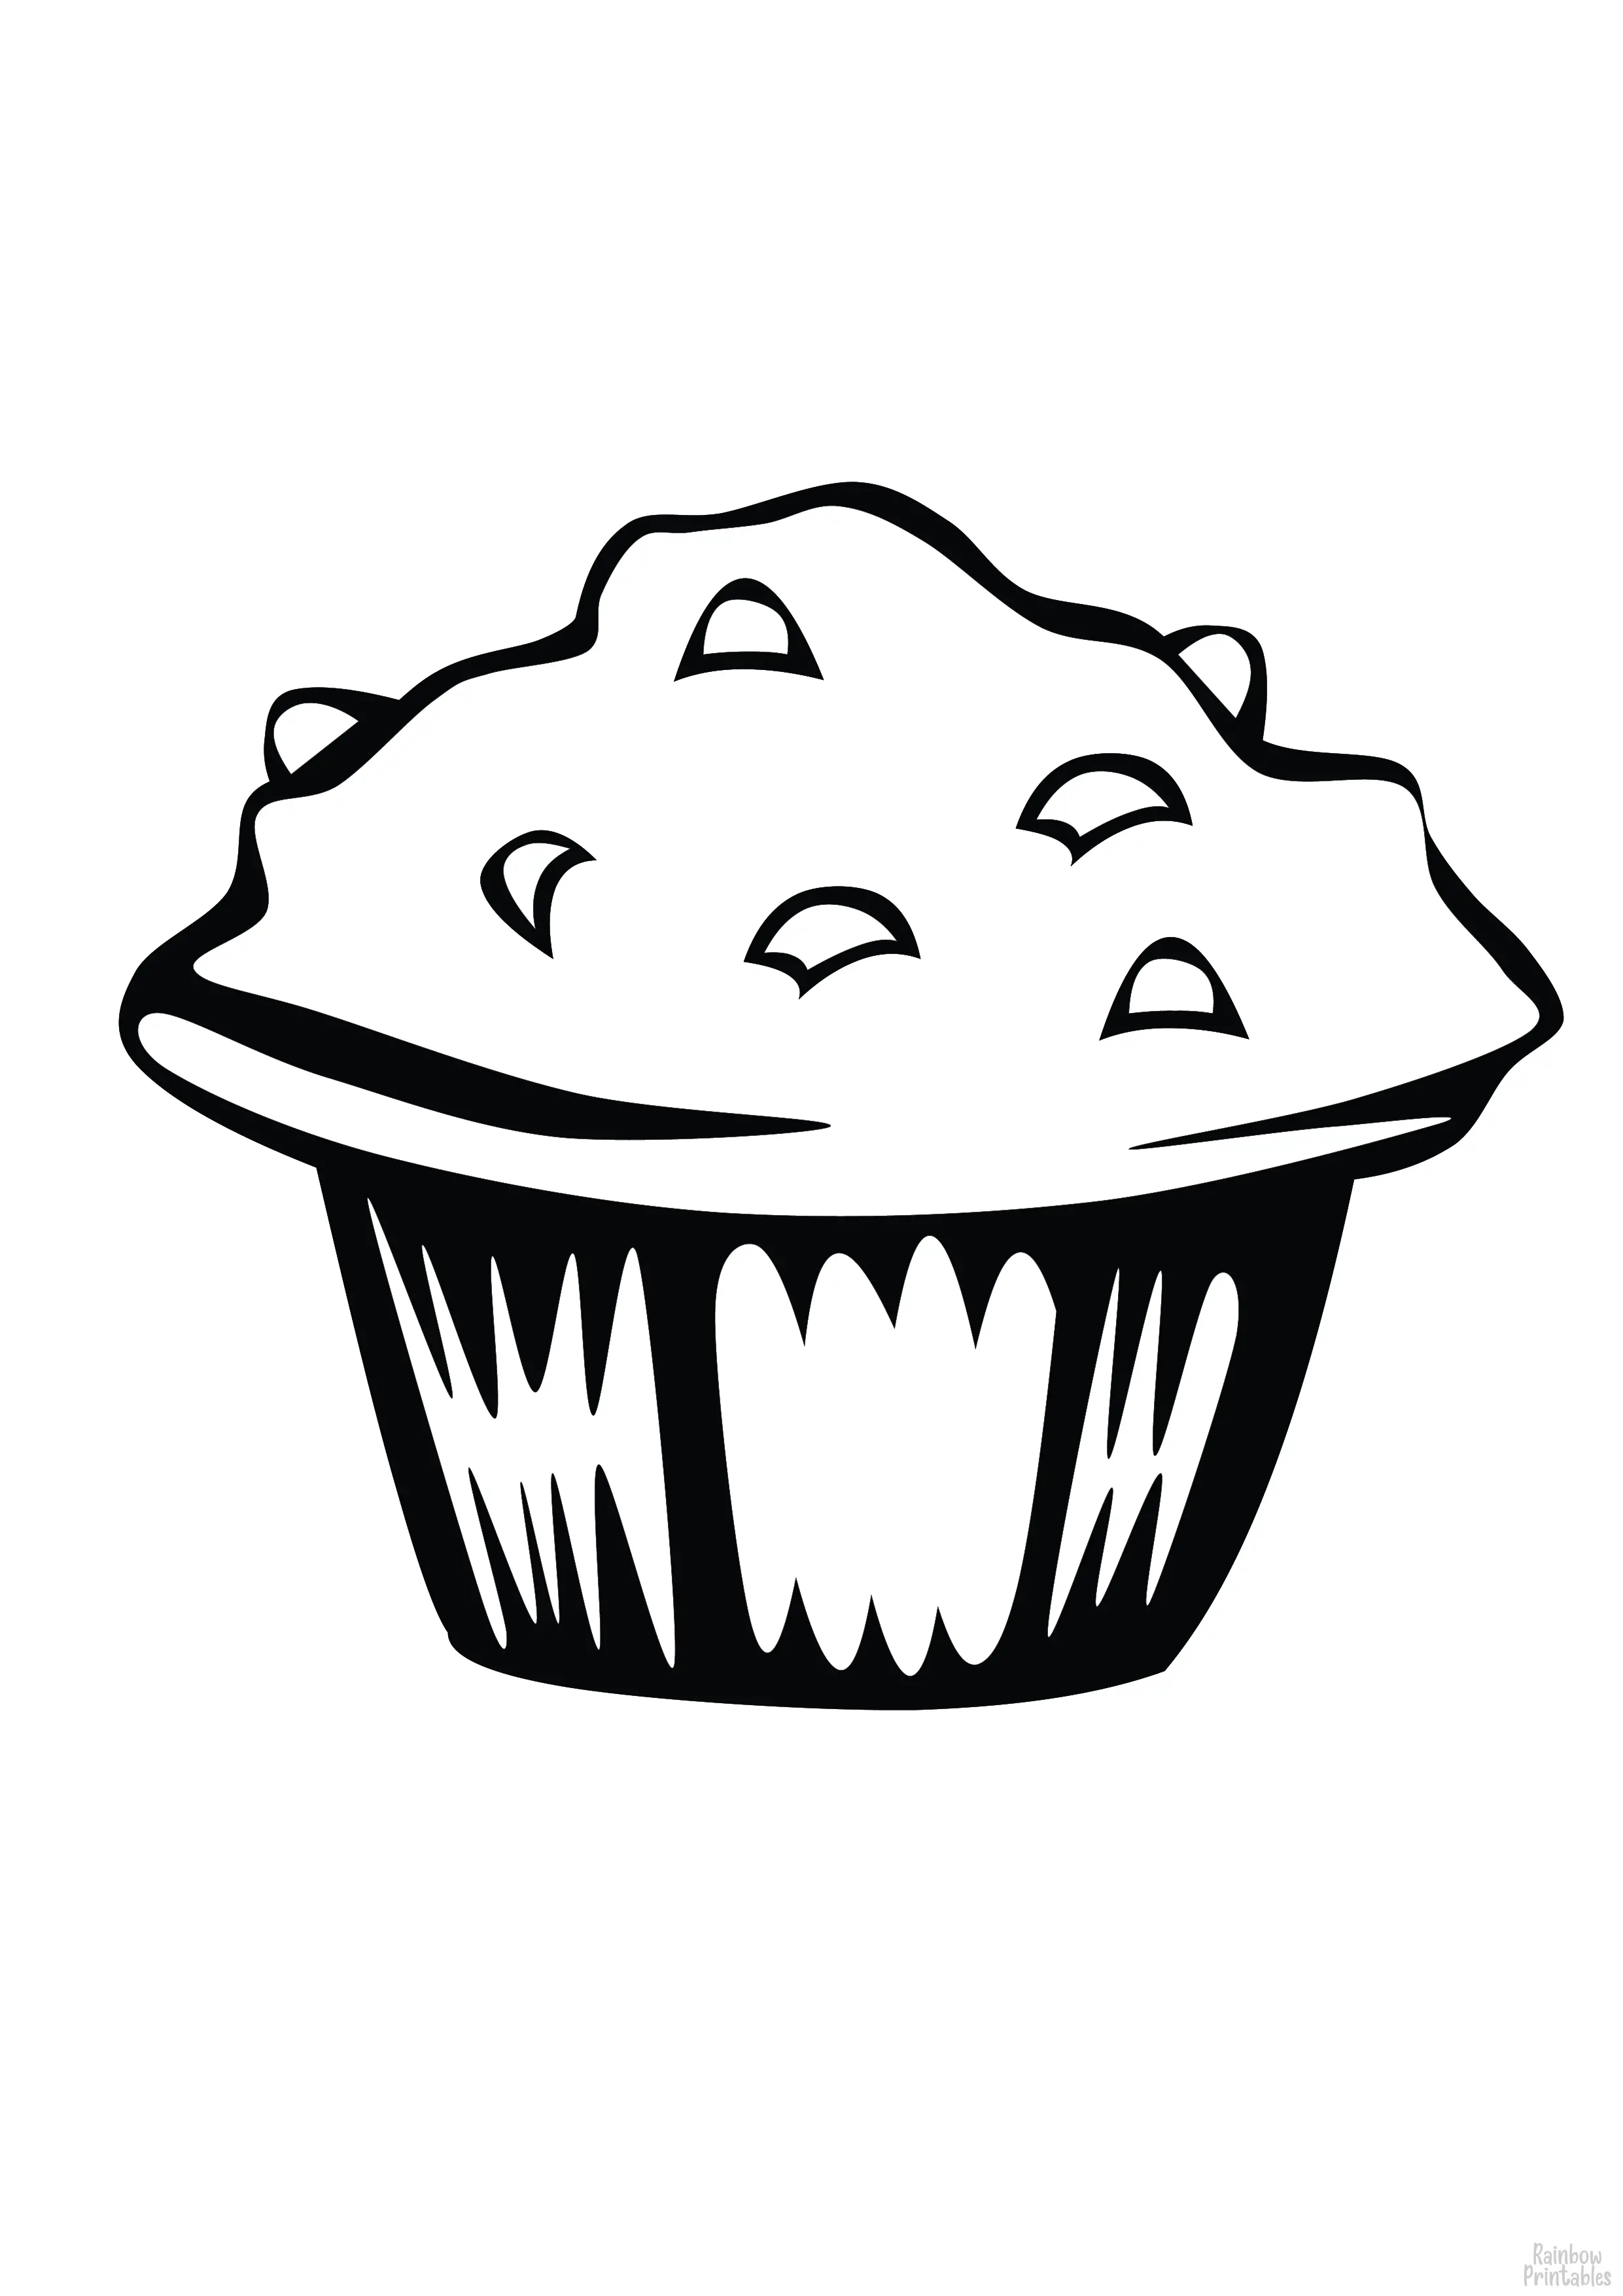 Muffin Tea time Food Clipart Coloring Pages Line Art Drawings for Kids-01